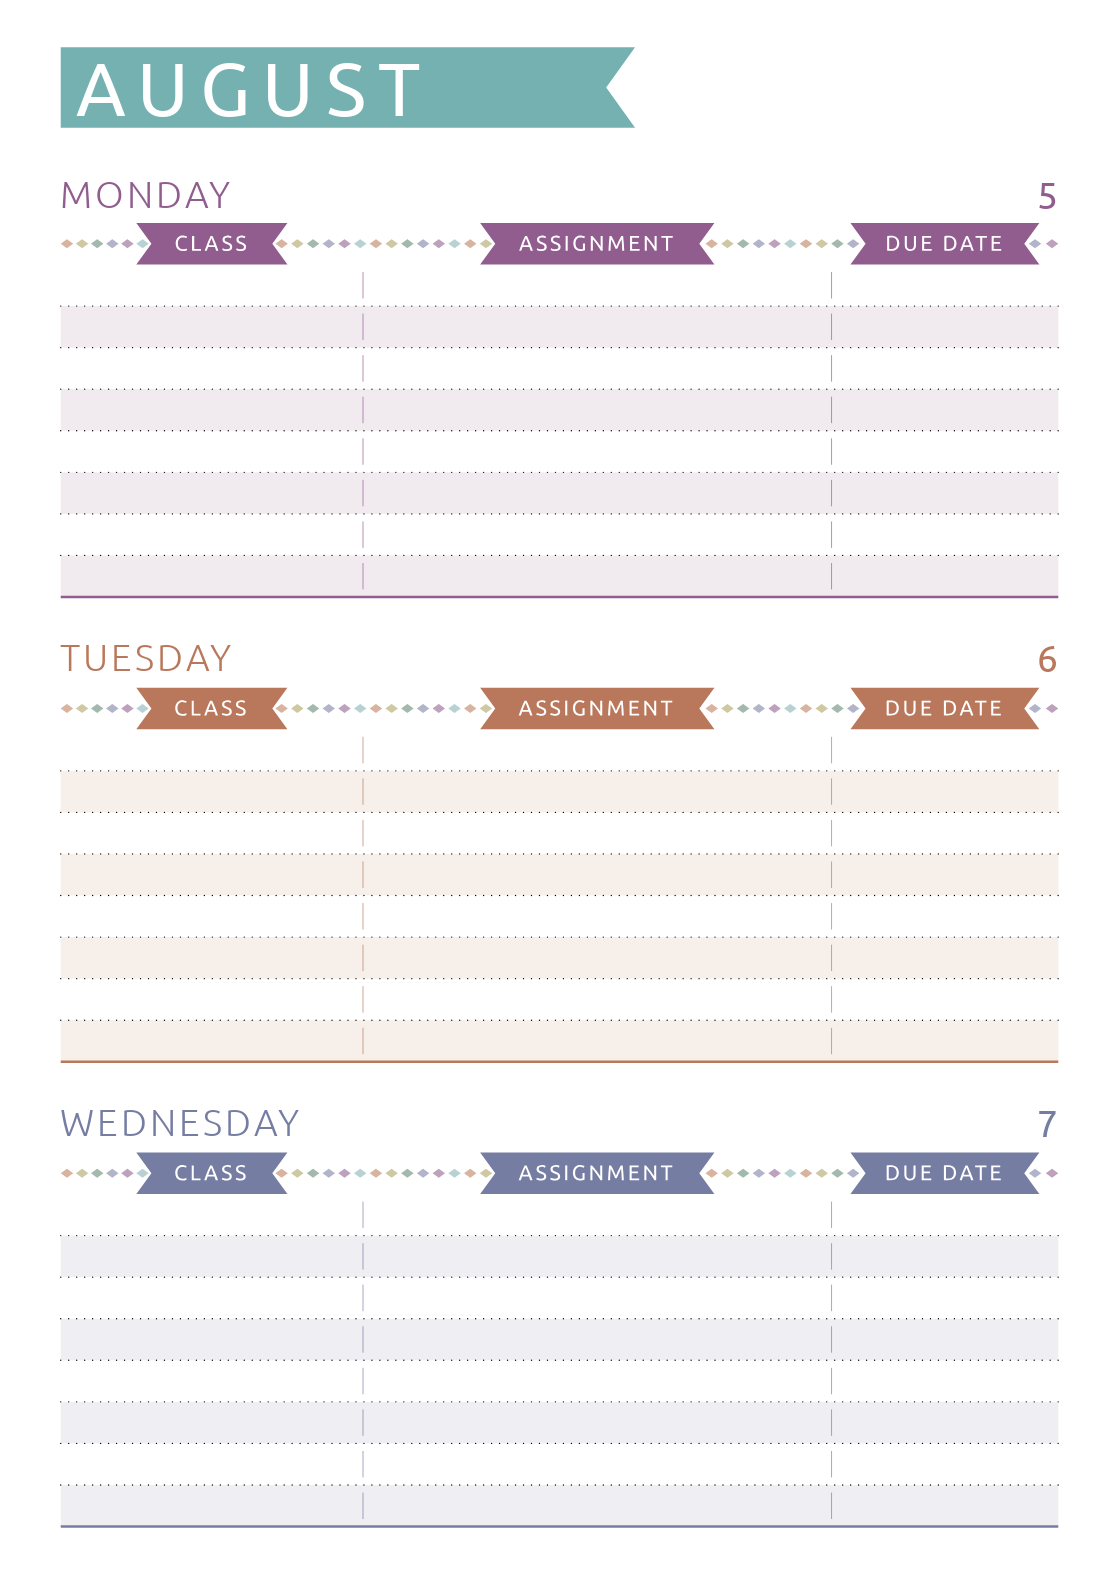 Daily College Activity Planner Timeline Free Downloadable  With Regard To College Tour Itinerary Template In College Tour Itinerary Template